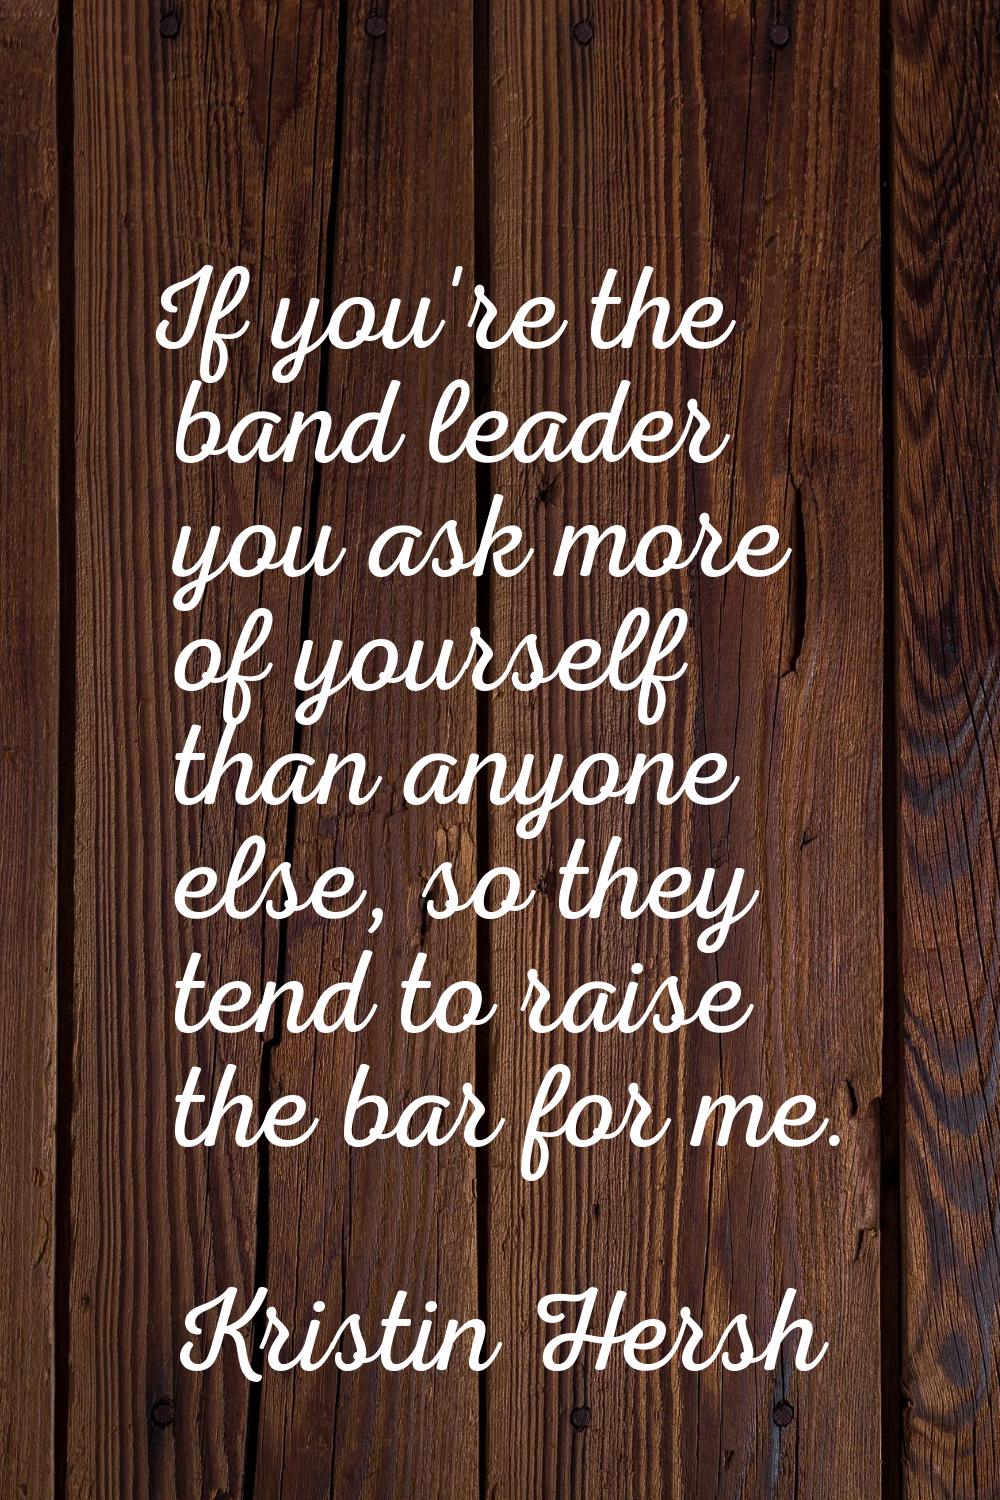 If you're the band leader you ask more of yourself than anyone else, so they tend to raise the bar 